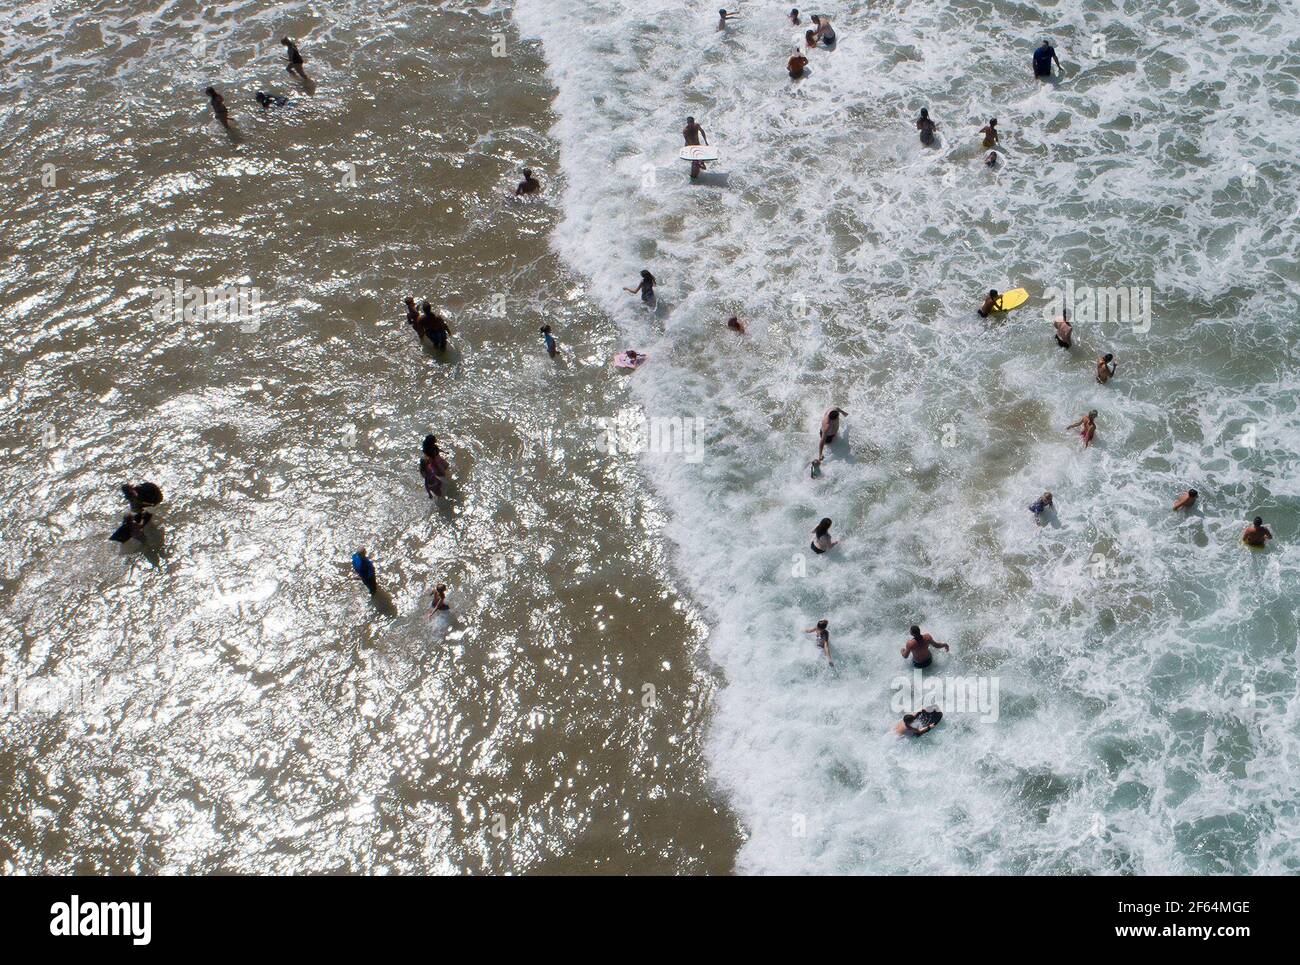 (210330) -- JOHANNESBURG, March 30, 2021 (Xinhua) -- People have fun at a beach in Durban, South Africa, March 29, 2021. (Xinhua) Stock Photo